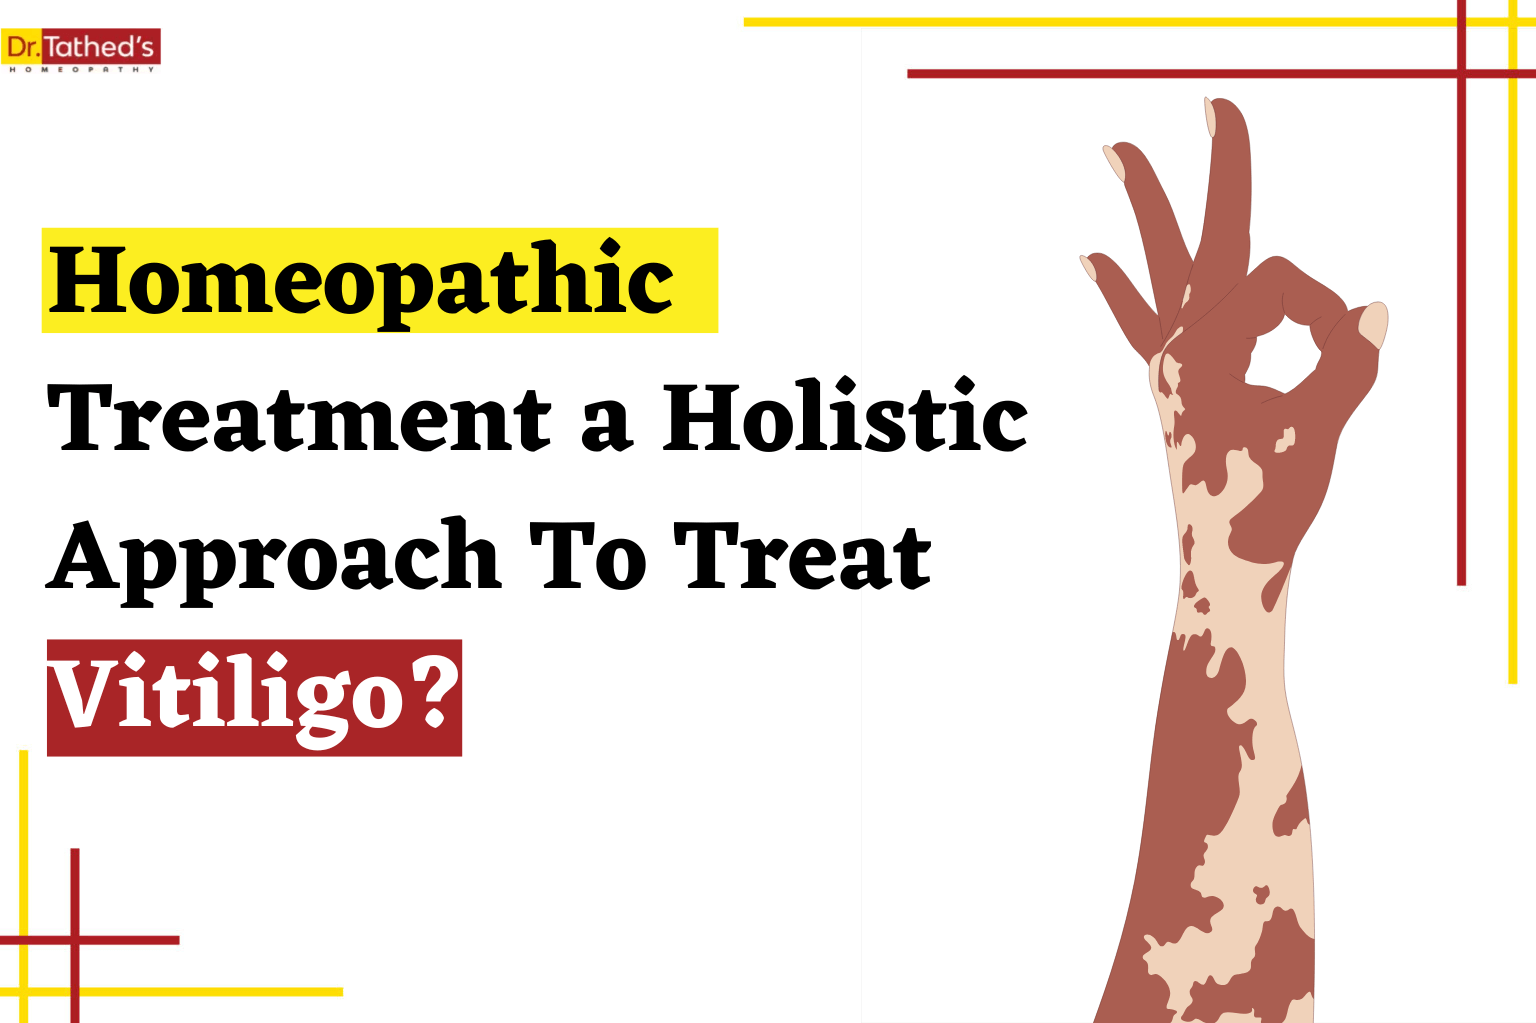 ATTACHMENT DETAILS Why-Is-Homeopathic-Treatment-A-Holistic-Approach-To-Treat-Vitiligo